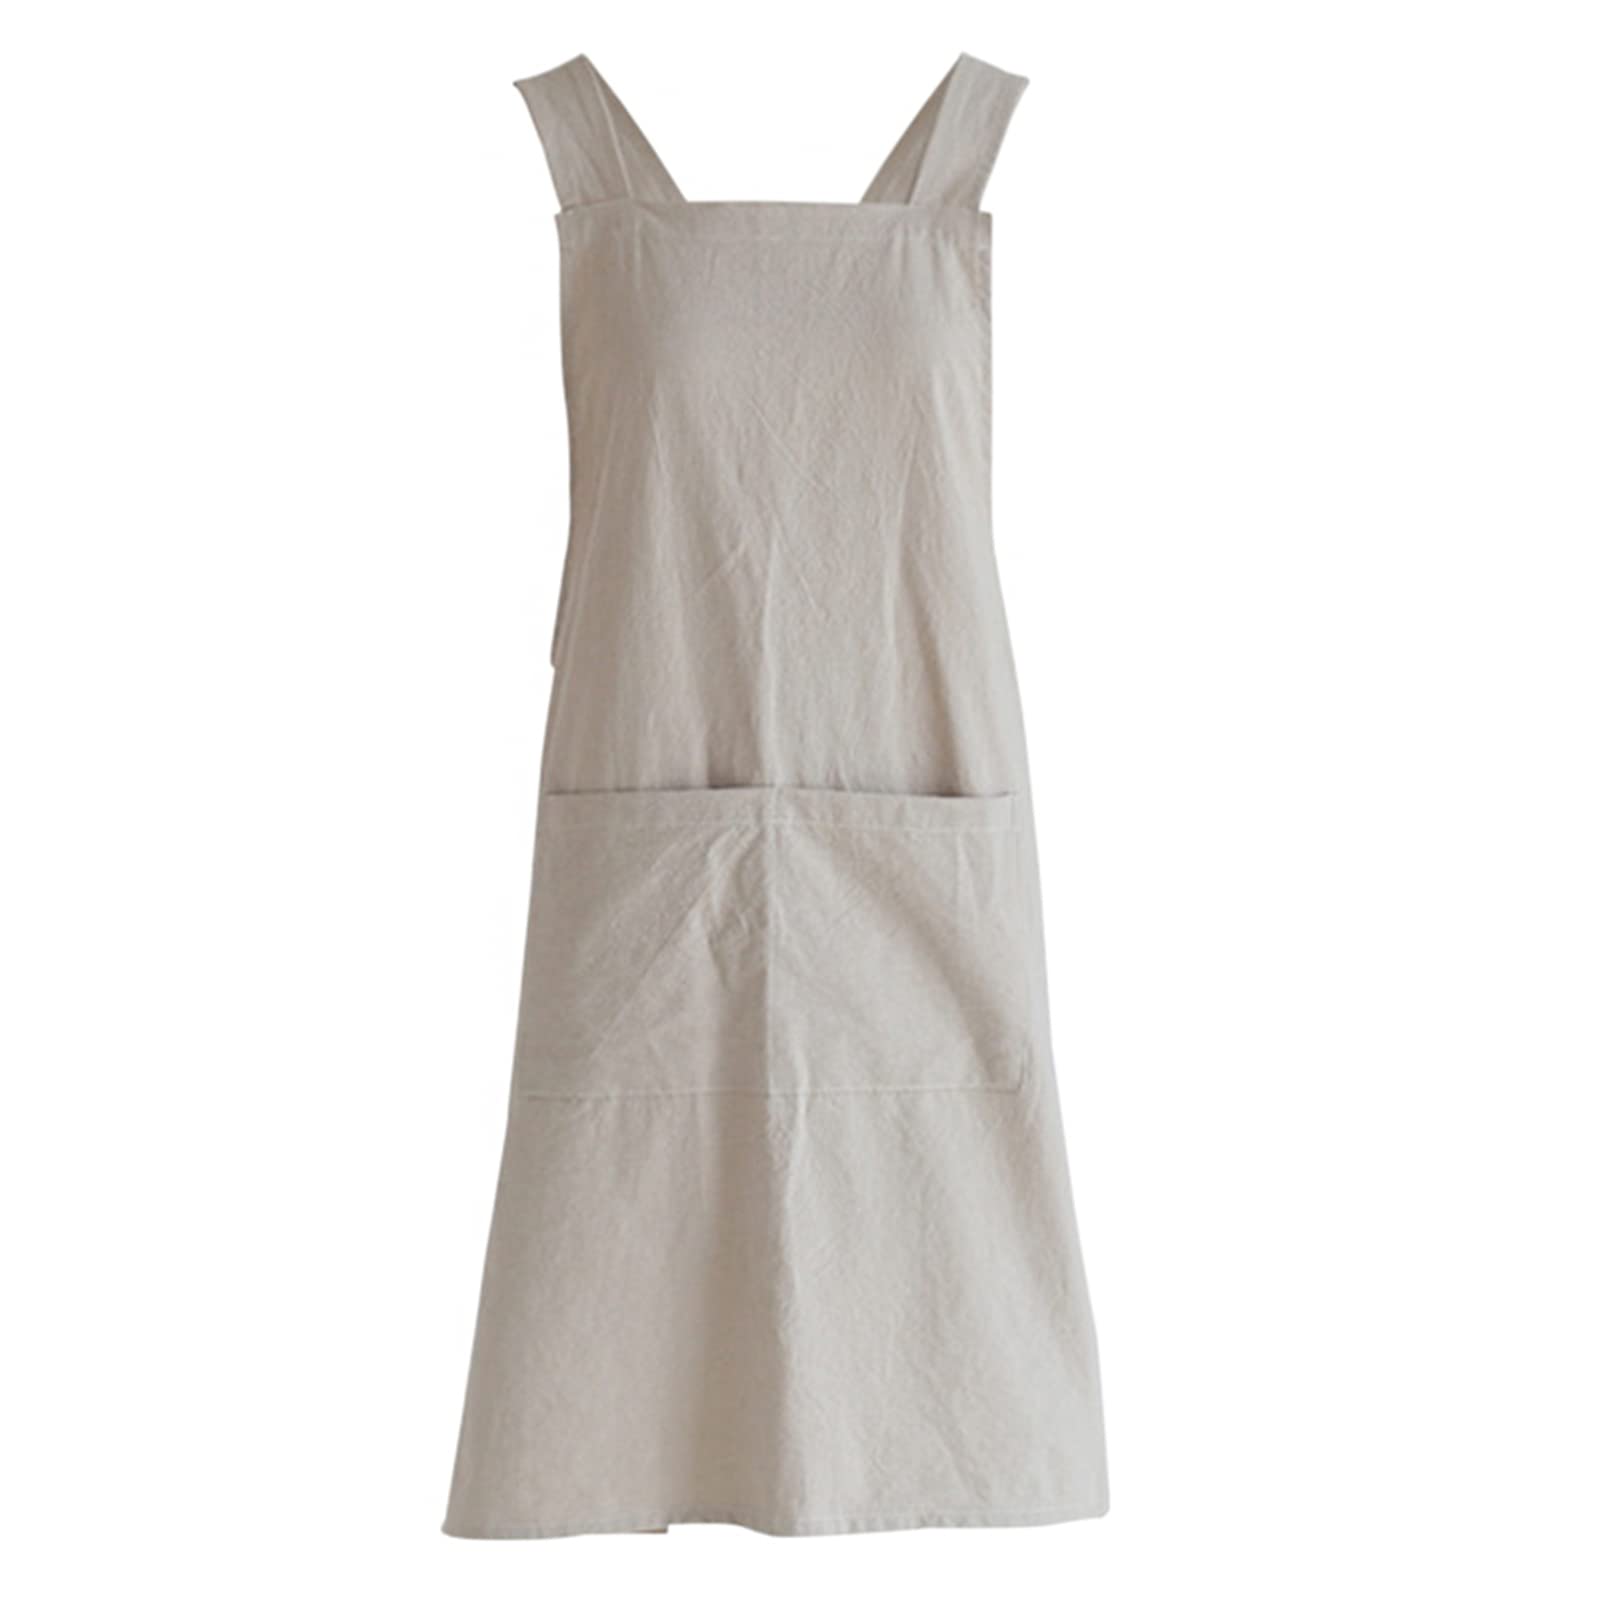 FBBULES Cotton Linen Apron with Pocket Solid Color Japanese Style Cross Bandage Halter Pinafore Chef Kitchen Cooking Clothes Men Women Bib Housewarming Gift